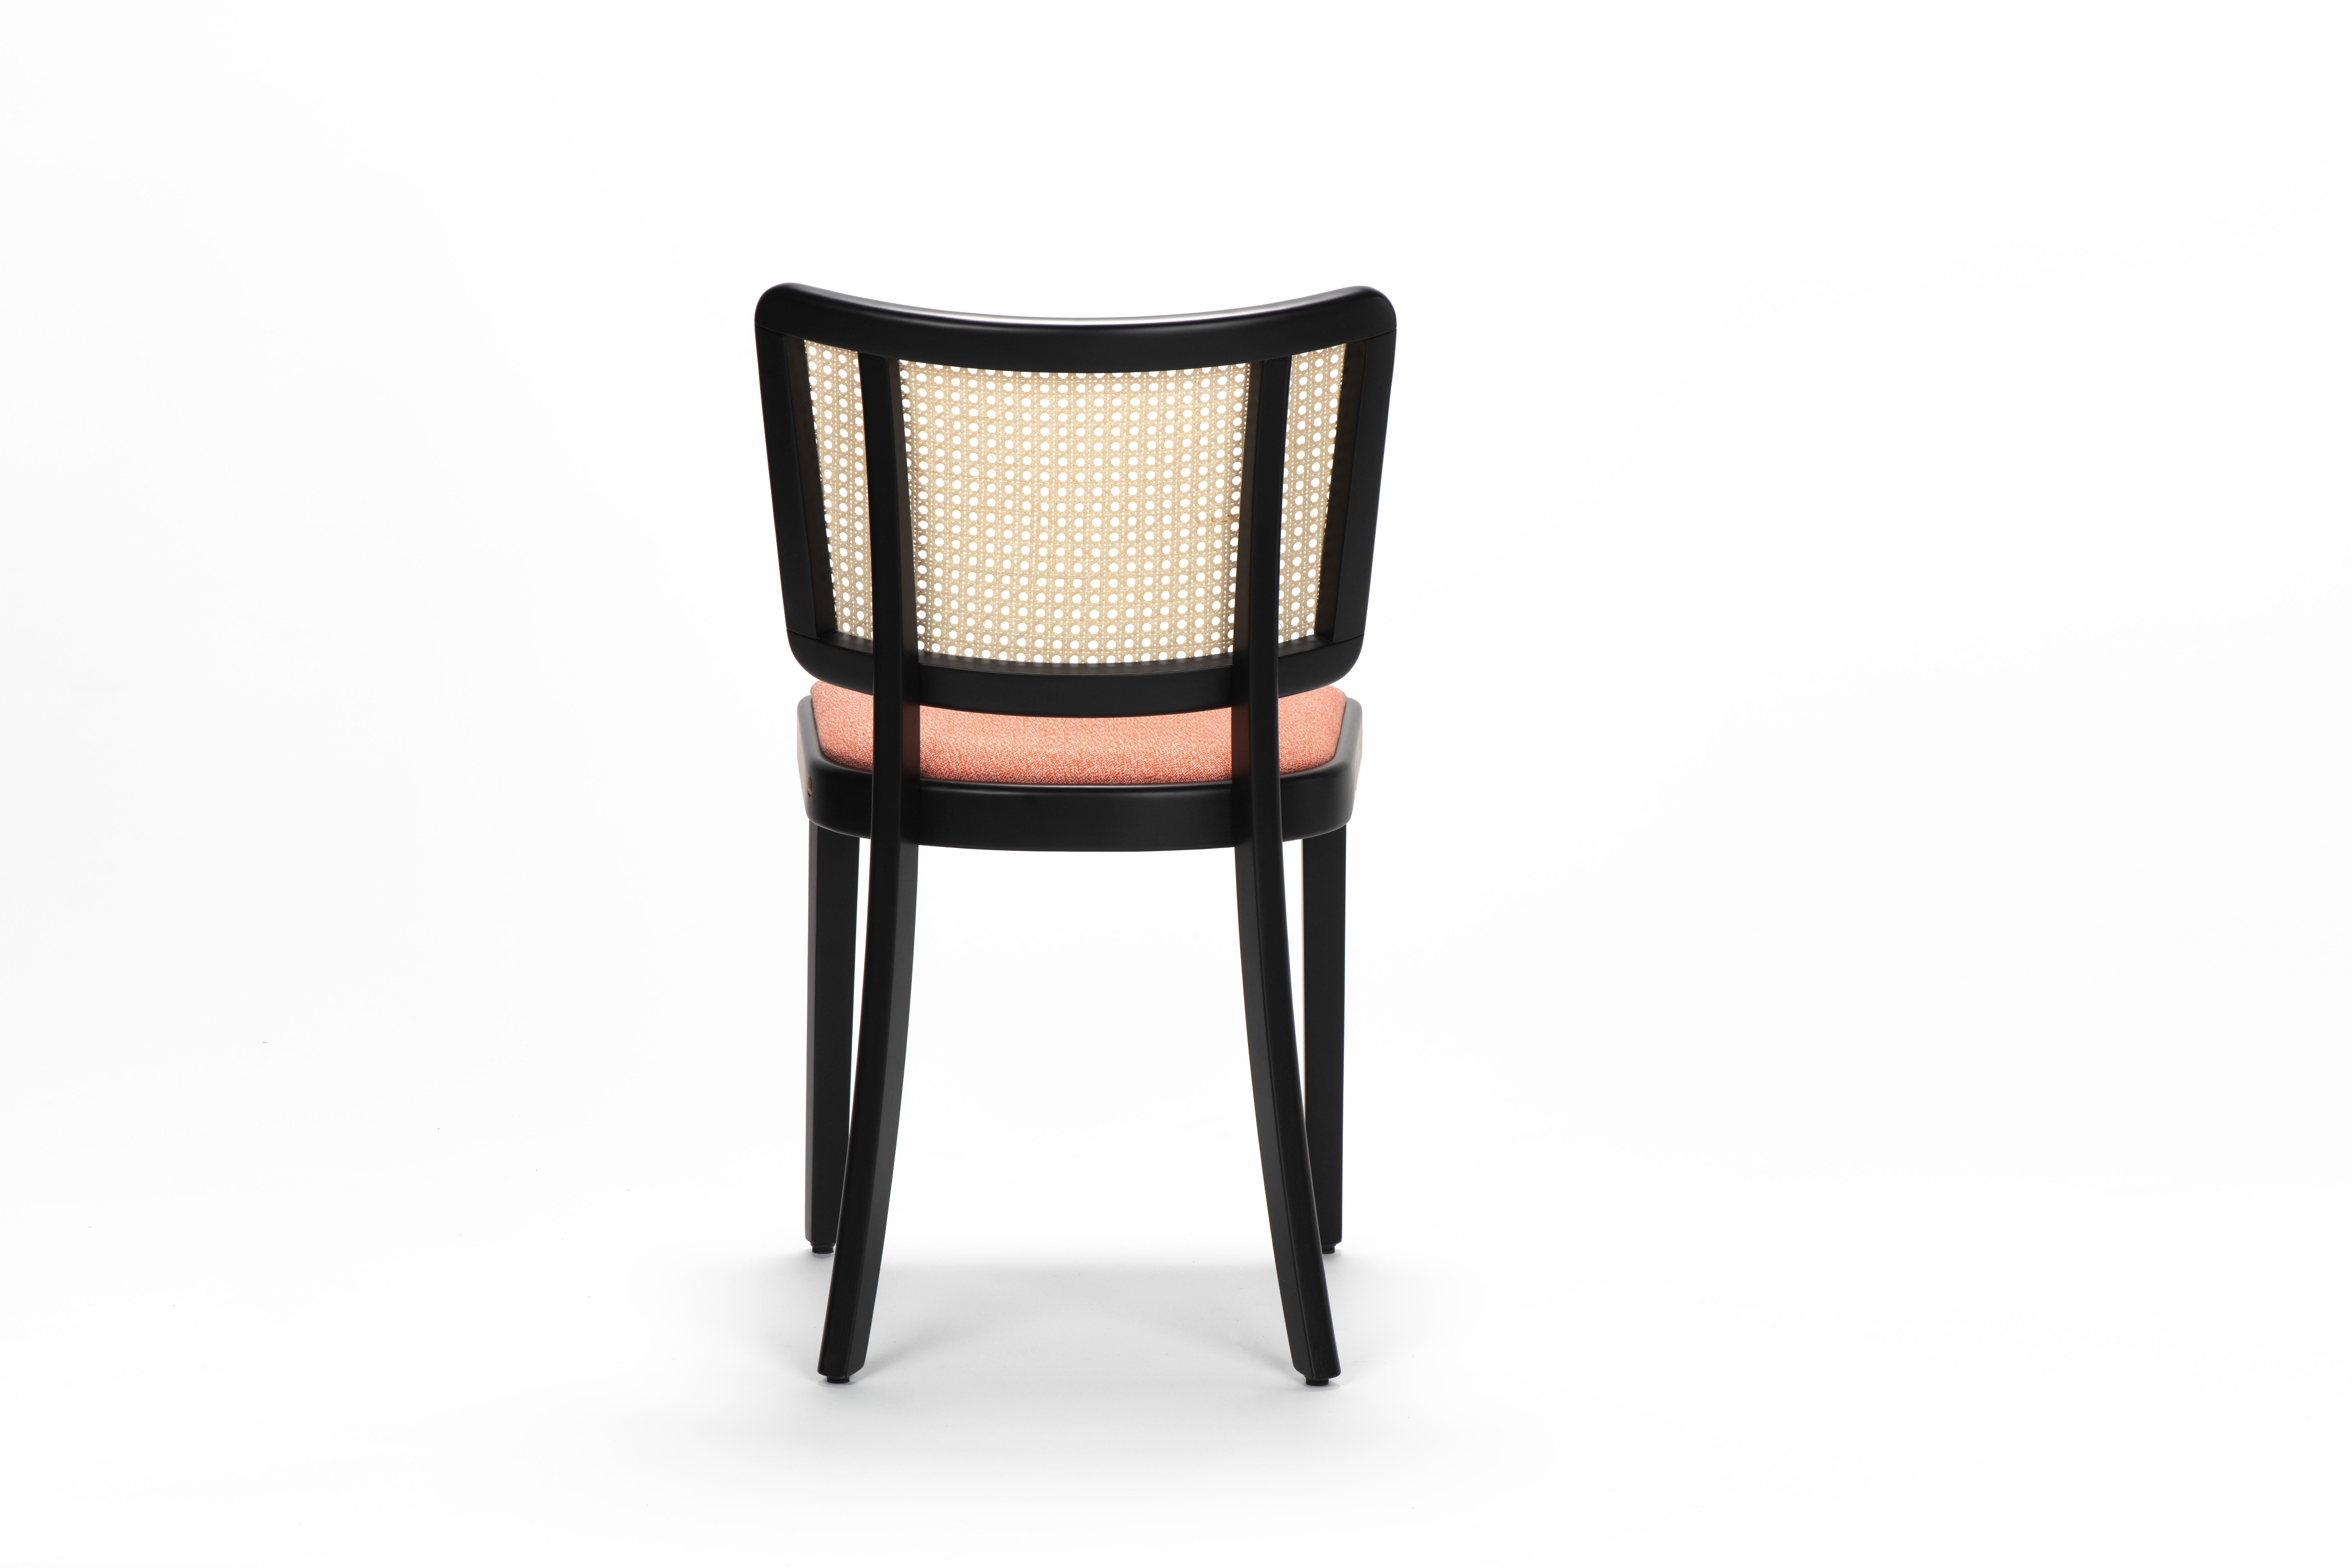 The continuous investigation into the long tradition of bent wood has led Gebrüder Thonet Vienna to the development of the Sölden chair, a new design that pays homage to the stylistic codes typical of the ‘30s, an important chapter in the tradition